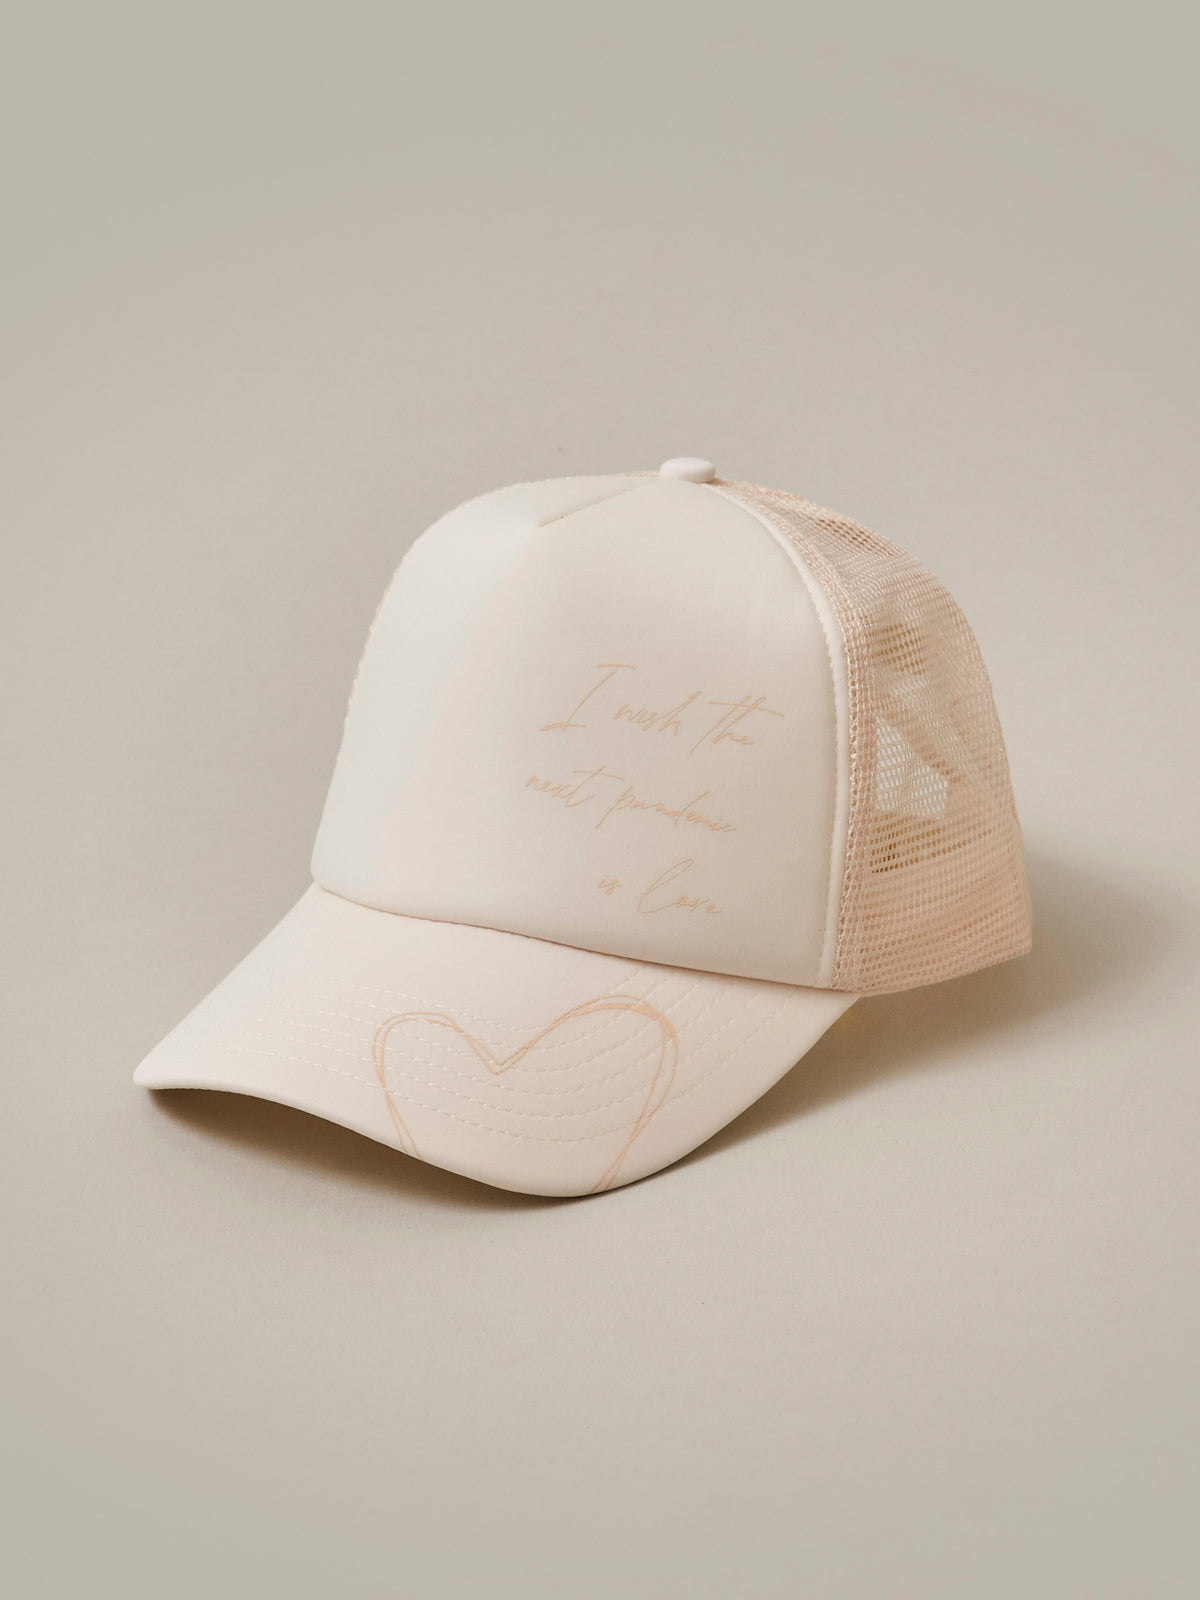 "I Wish The Next Pandemic Is Love" Buttercream Trucker Cap/ LMTD edition